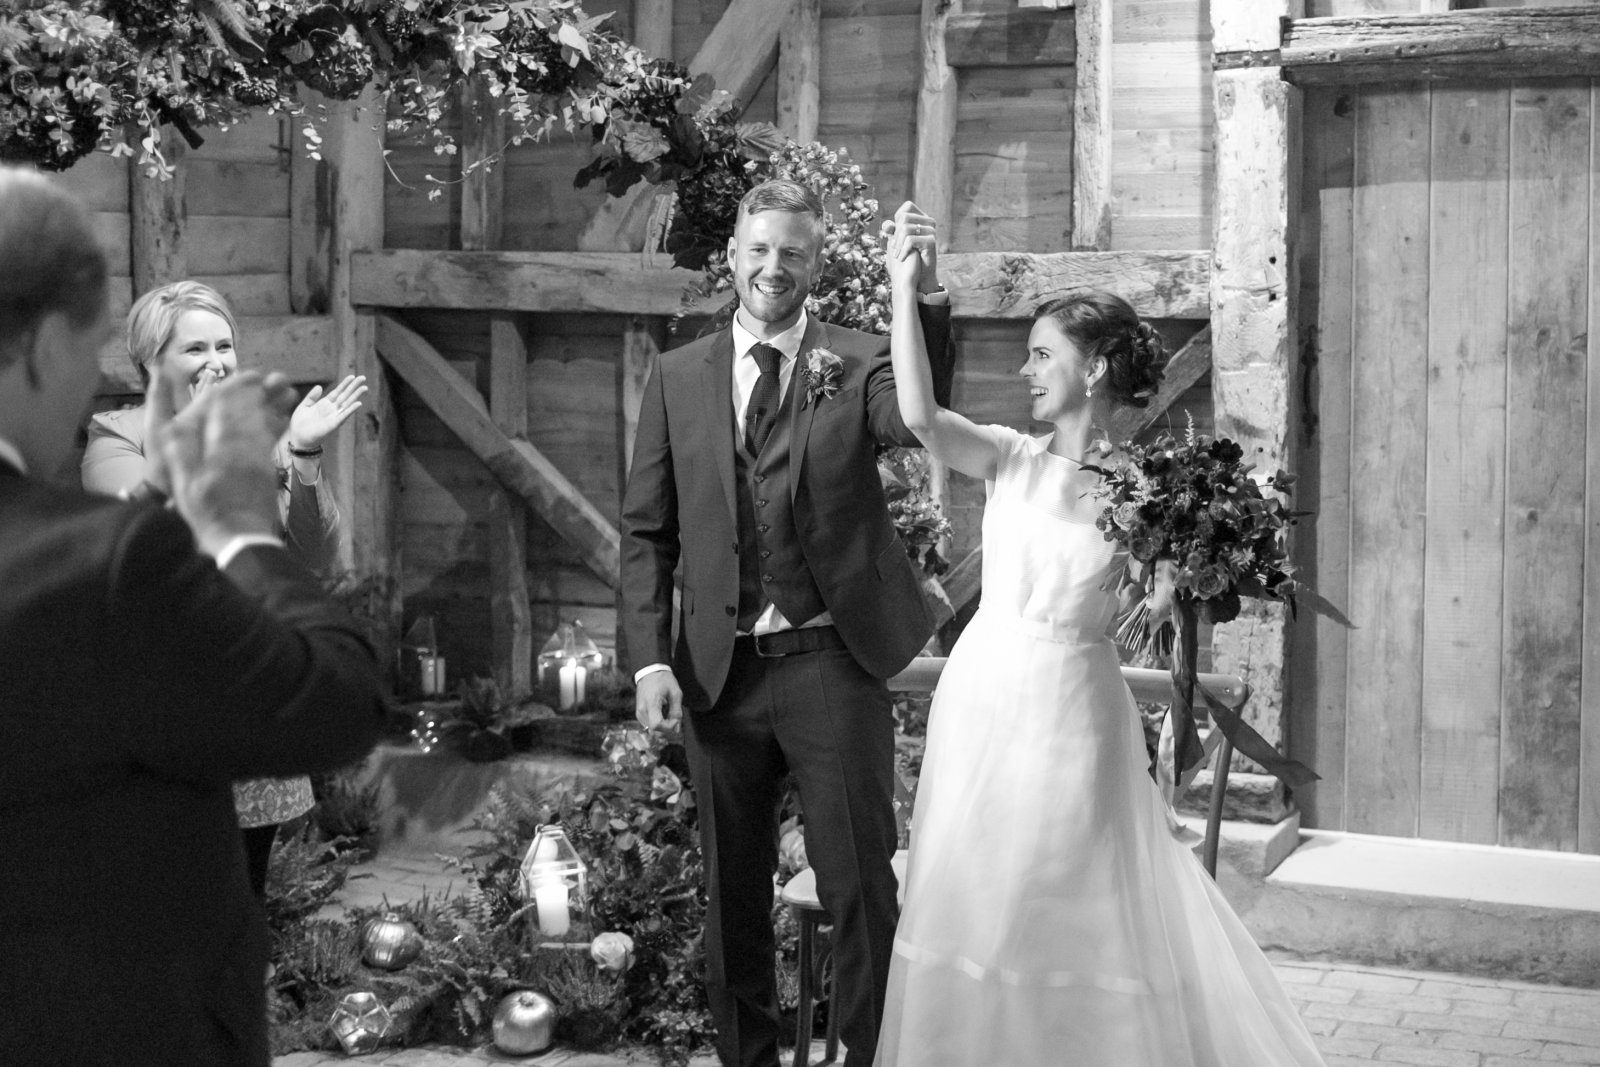 The end of the wedding ceremony at High Billinghurst Farm